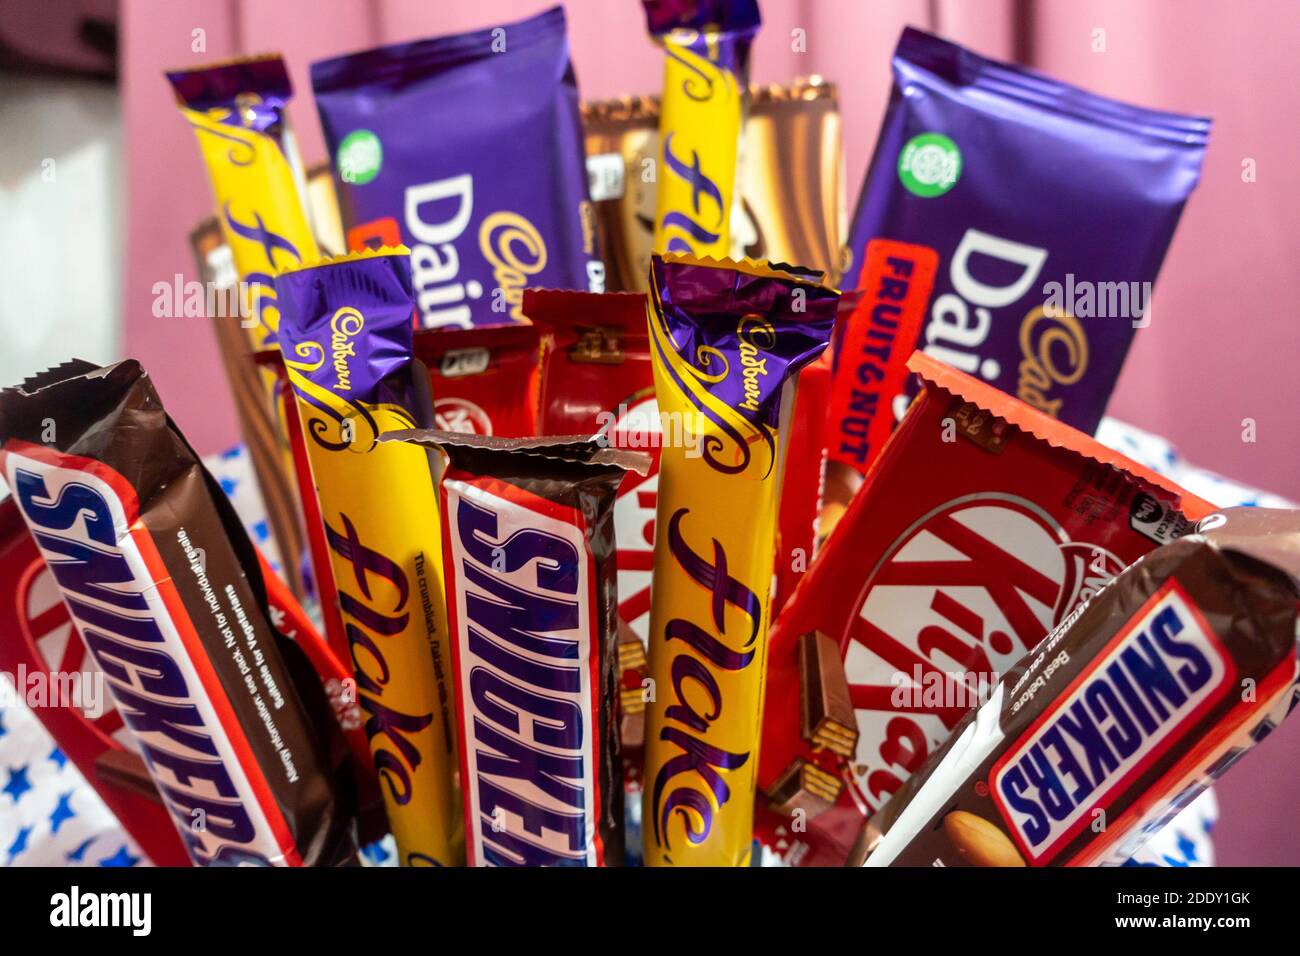 An arrangement of different chocolate bars given as a present. Stock Photo